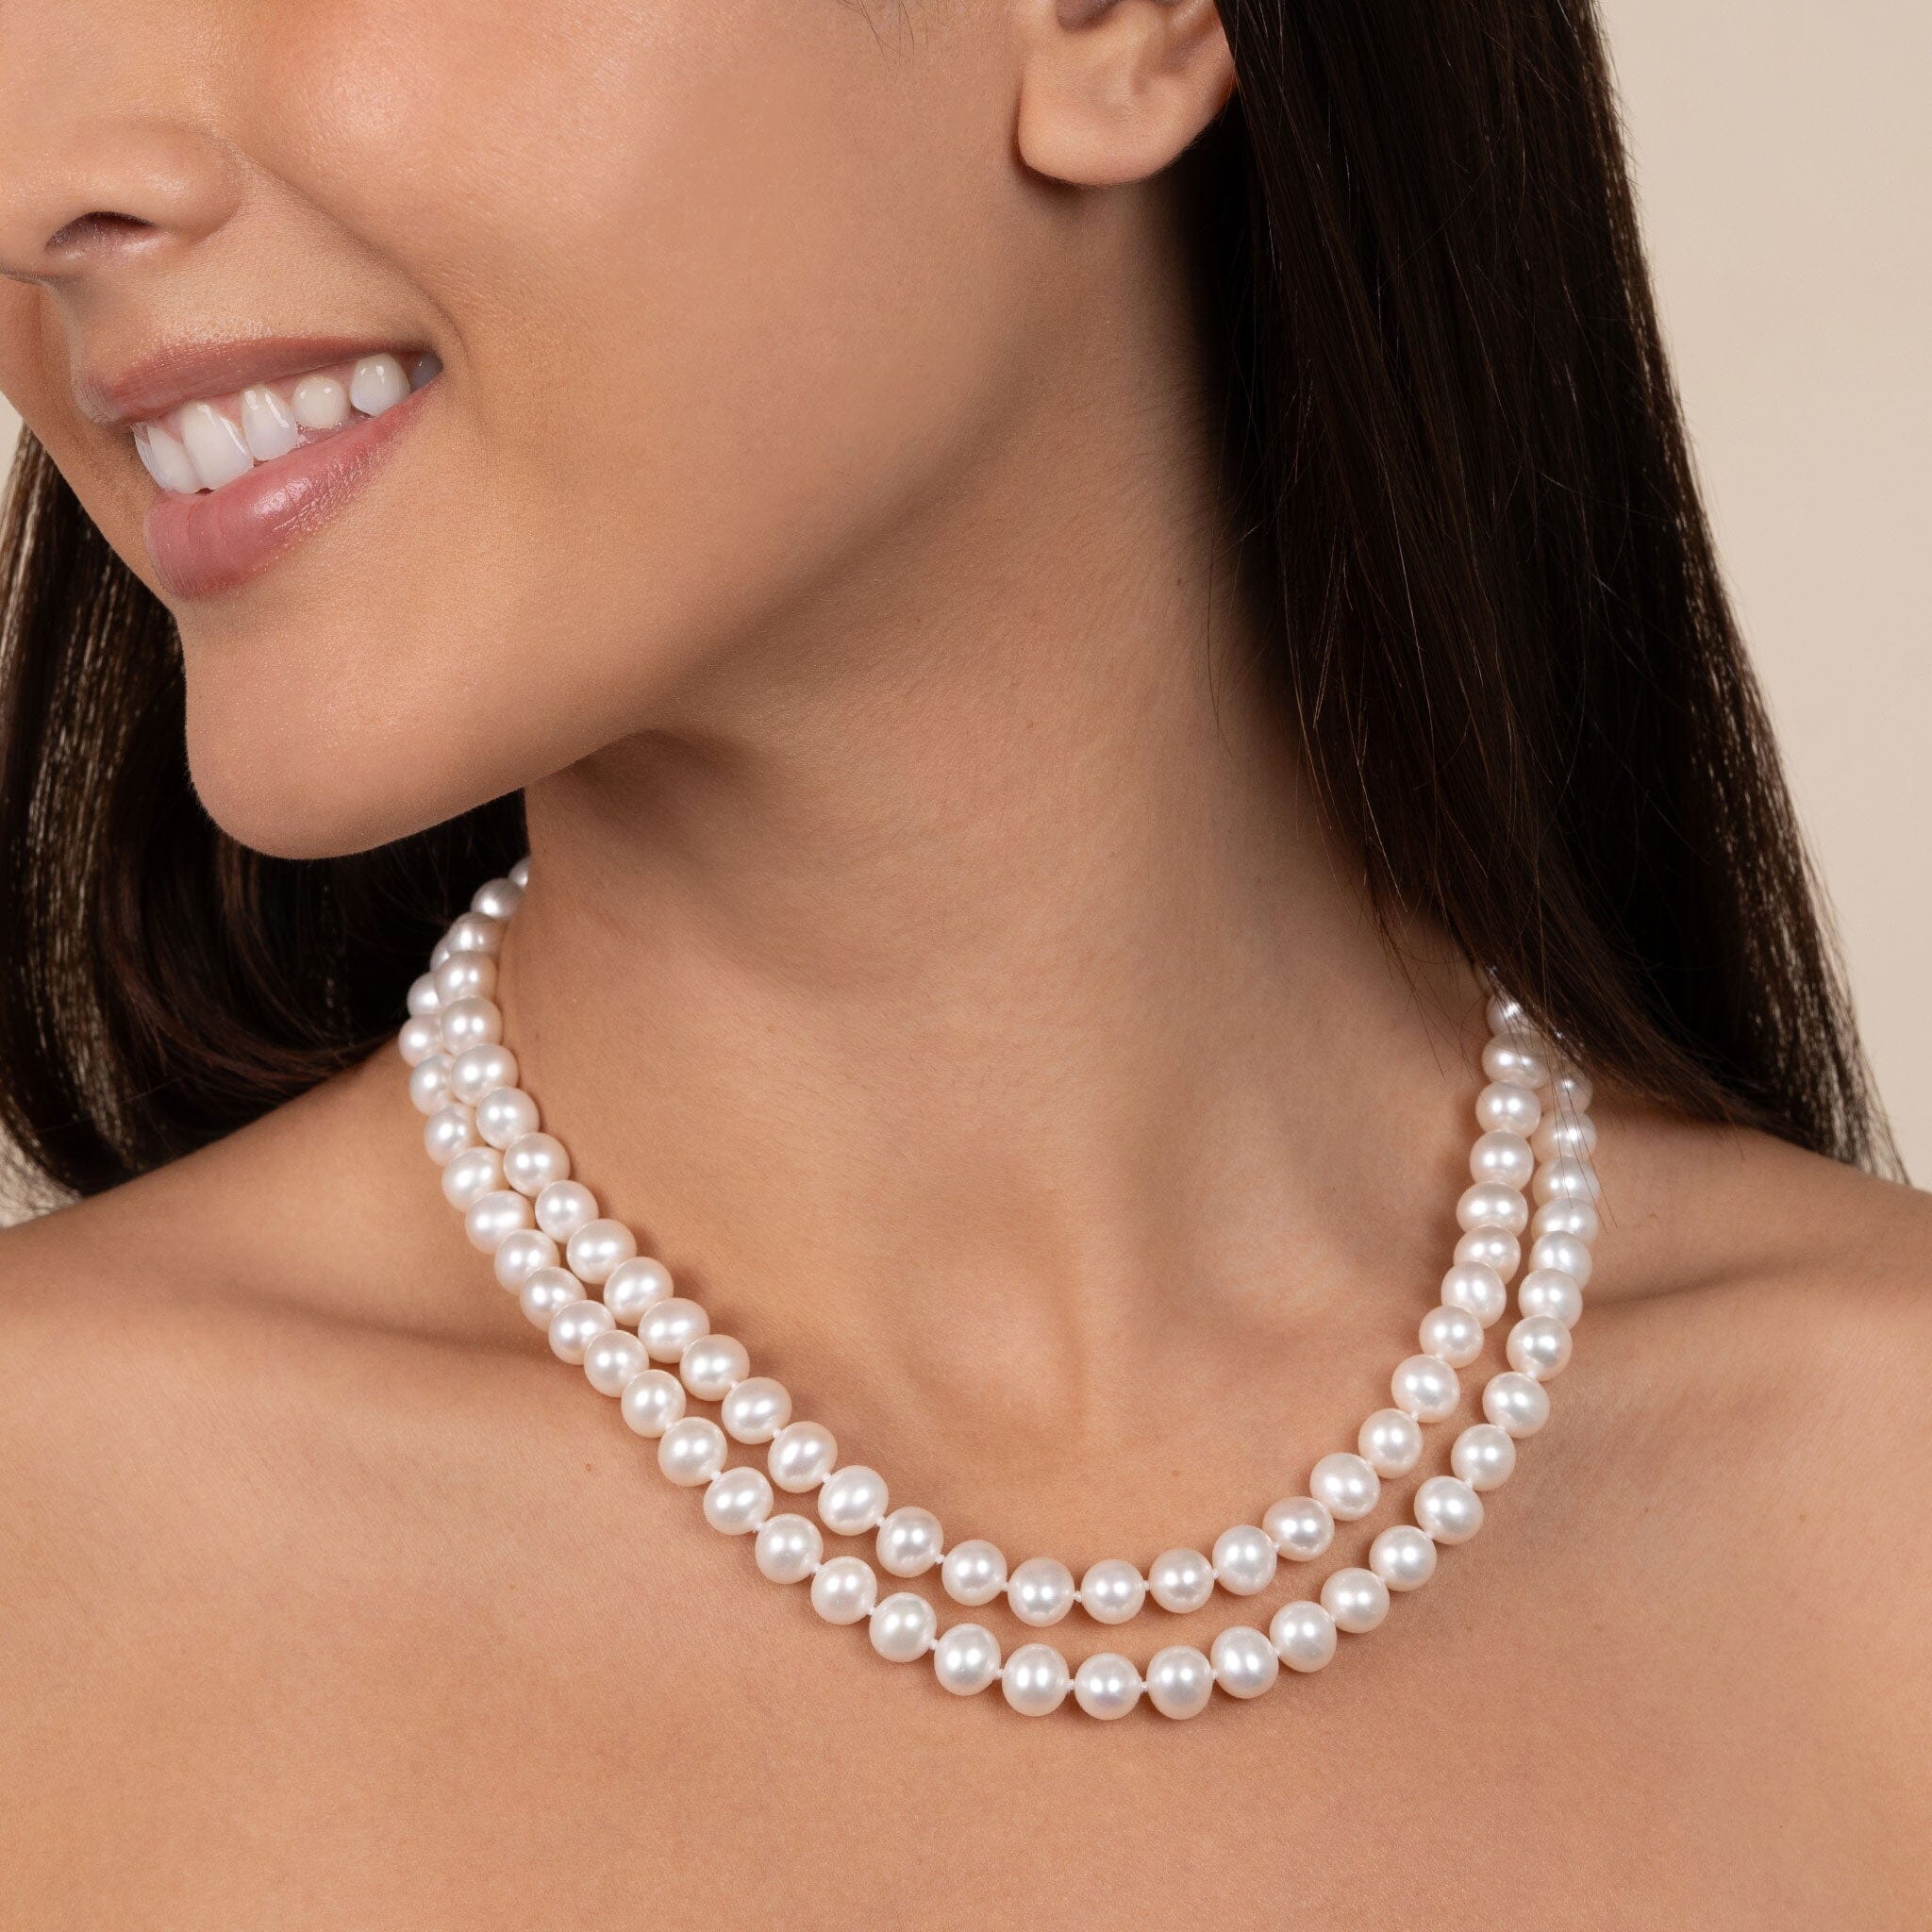 5 Double Strand Pearl Necklaces Perfect For Any Occasion - PearlsOnly ::  PearlsOnly